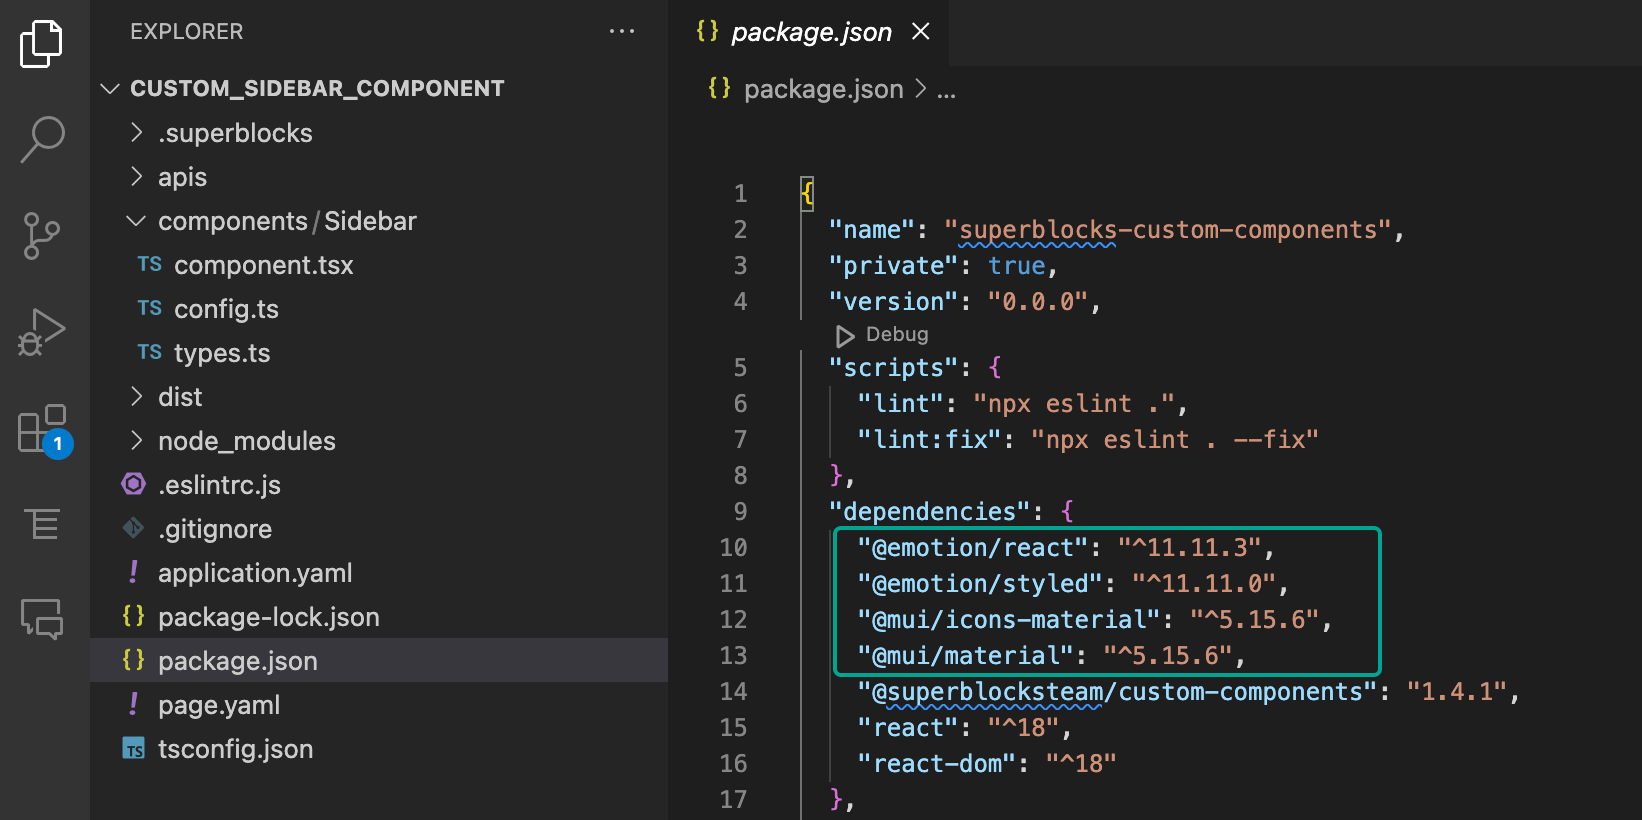 The JavaScript libraries used by the MaterialUI component are added to the package.json file.